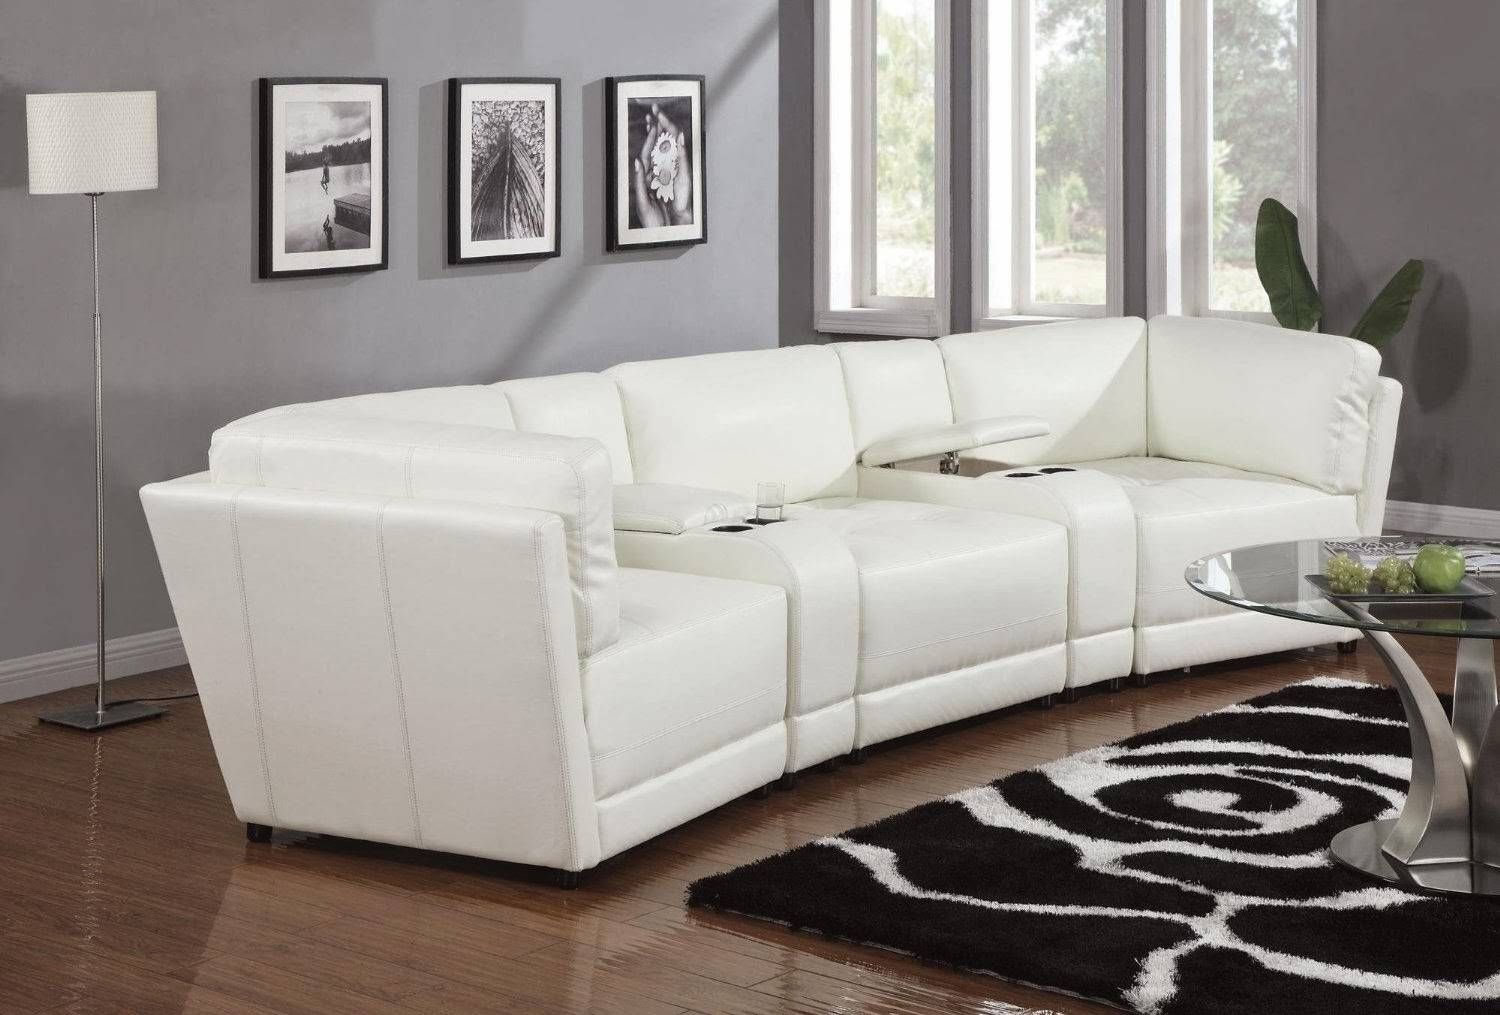 Sofa Maryland Home Design Furniture Decorating Amazing Simple With With Regard To Sofa Maryland (View 6 of 25)